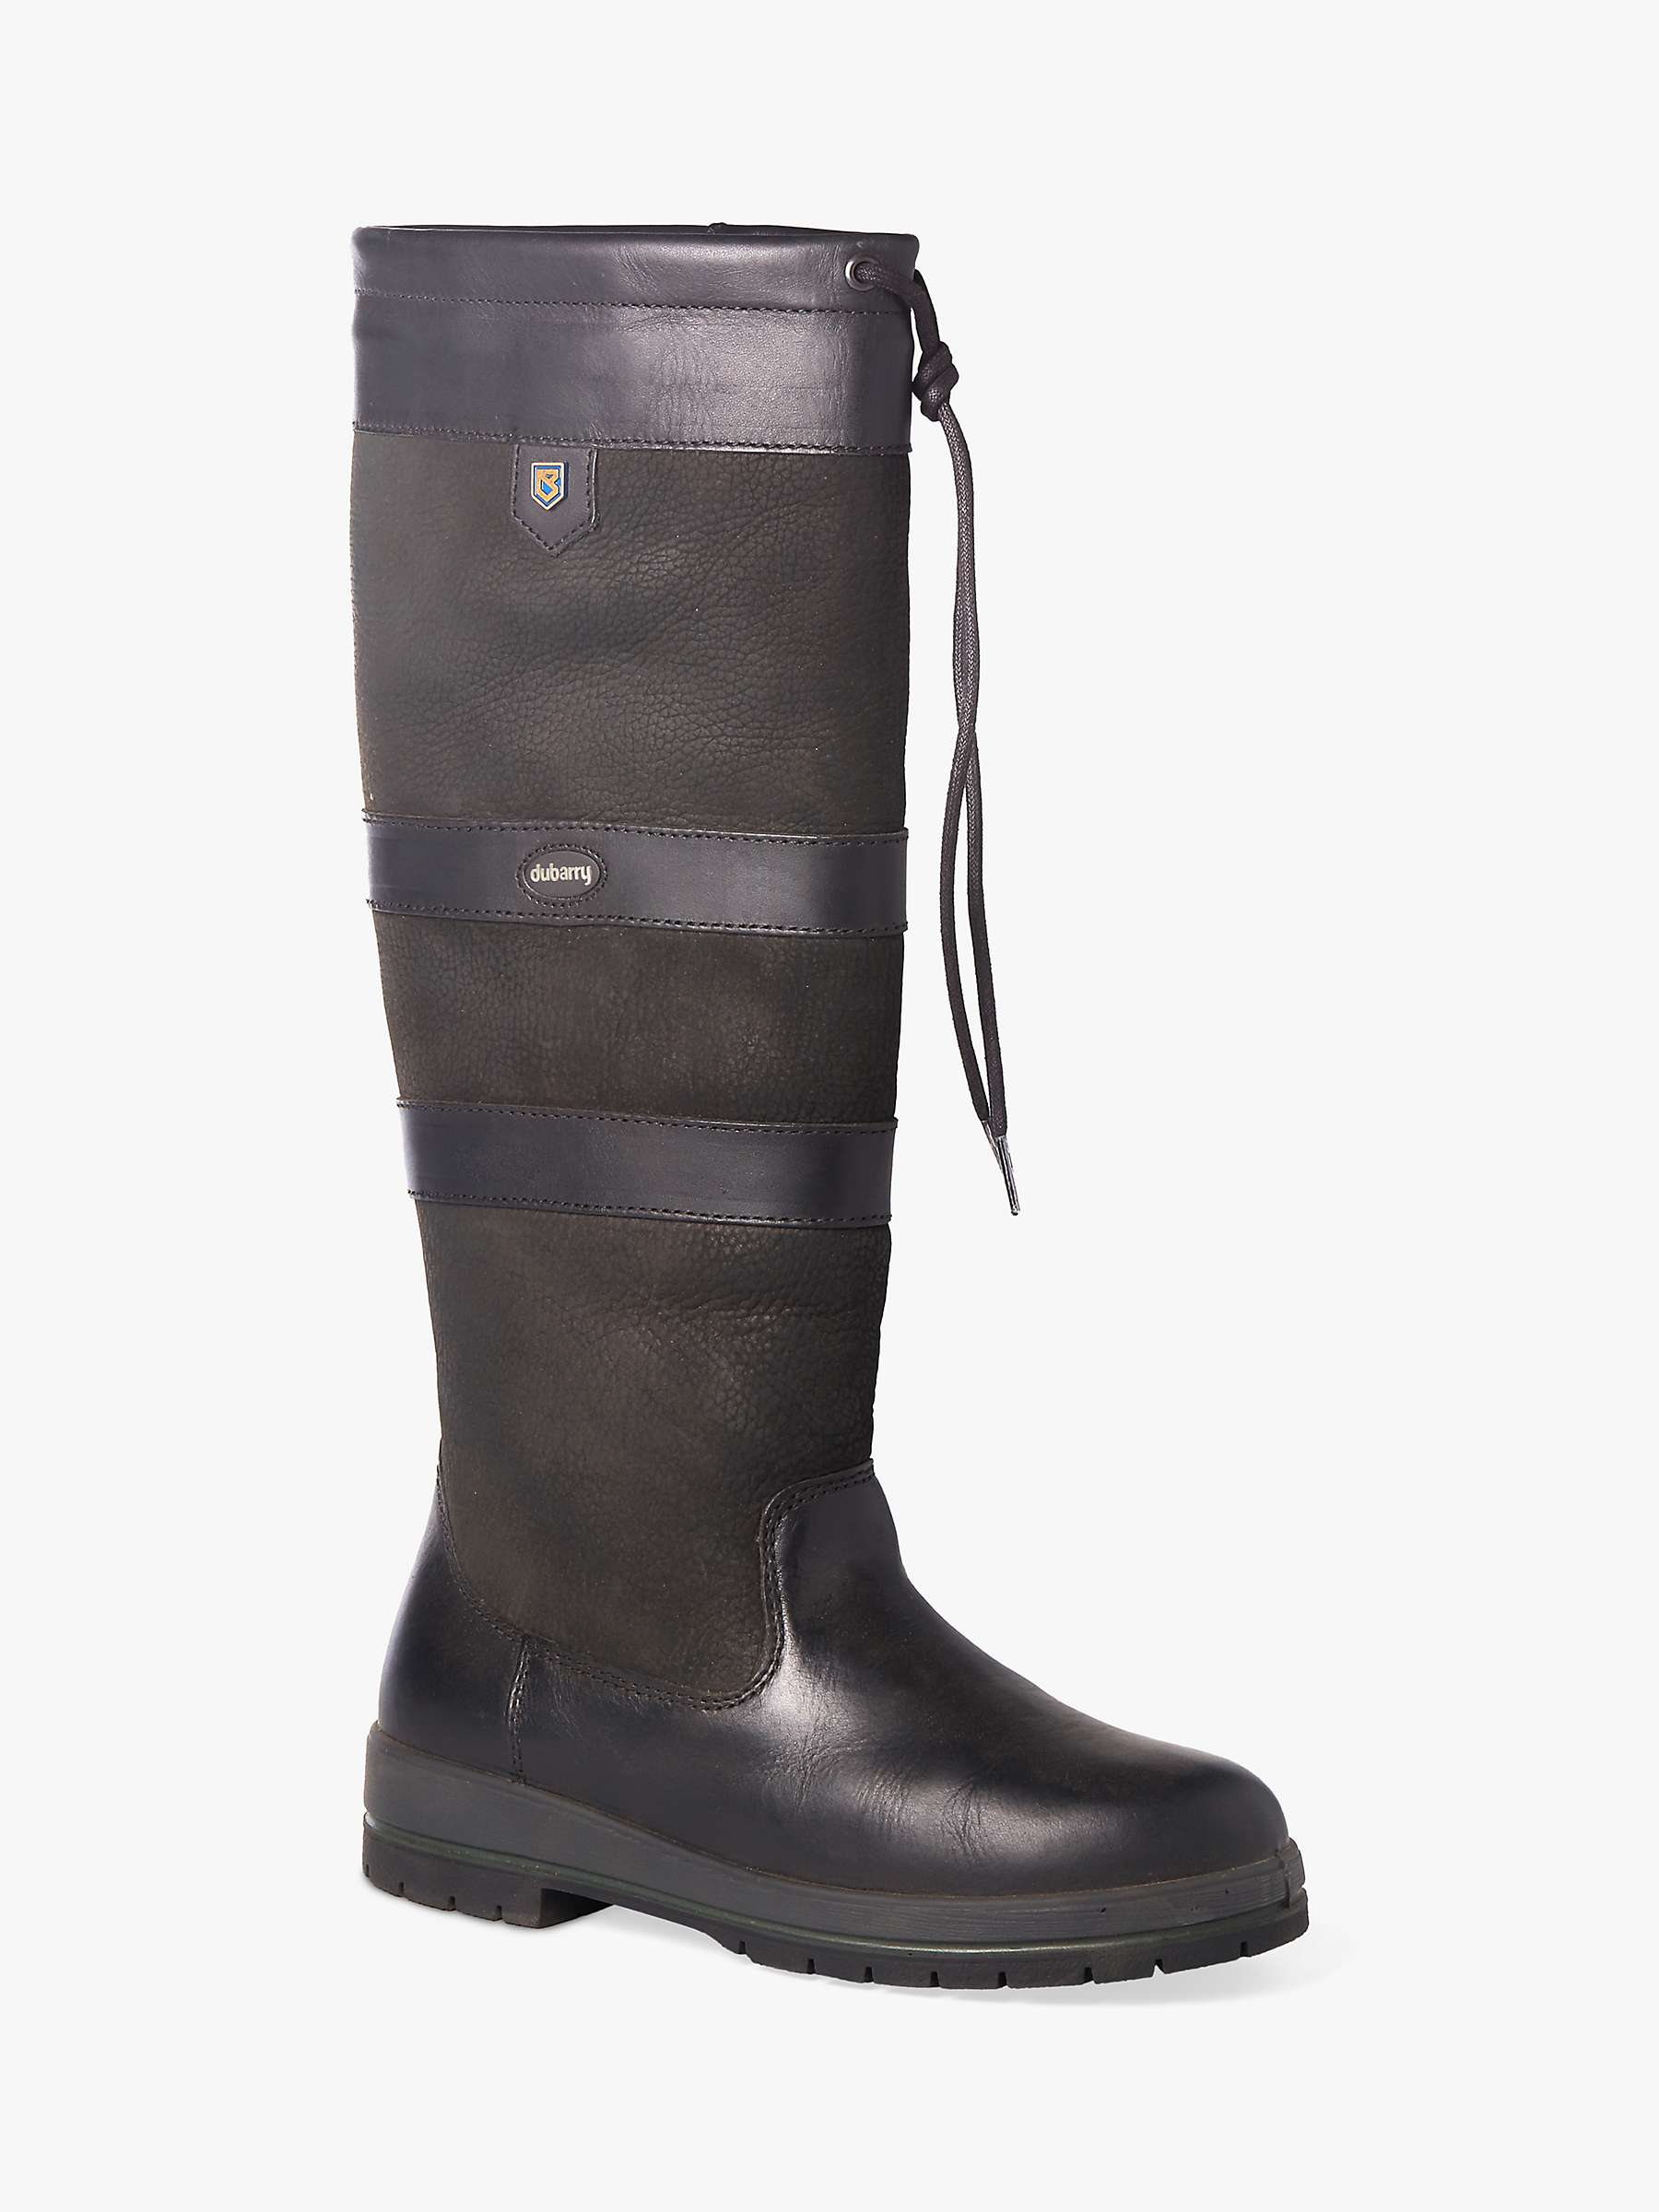 Buy Dubarry Galway Leather Knee Boots, Black Online at johnlewis.com